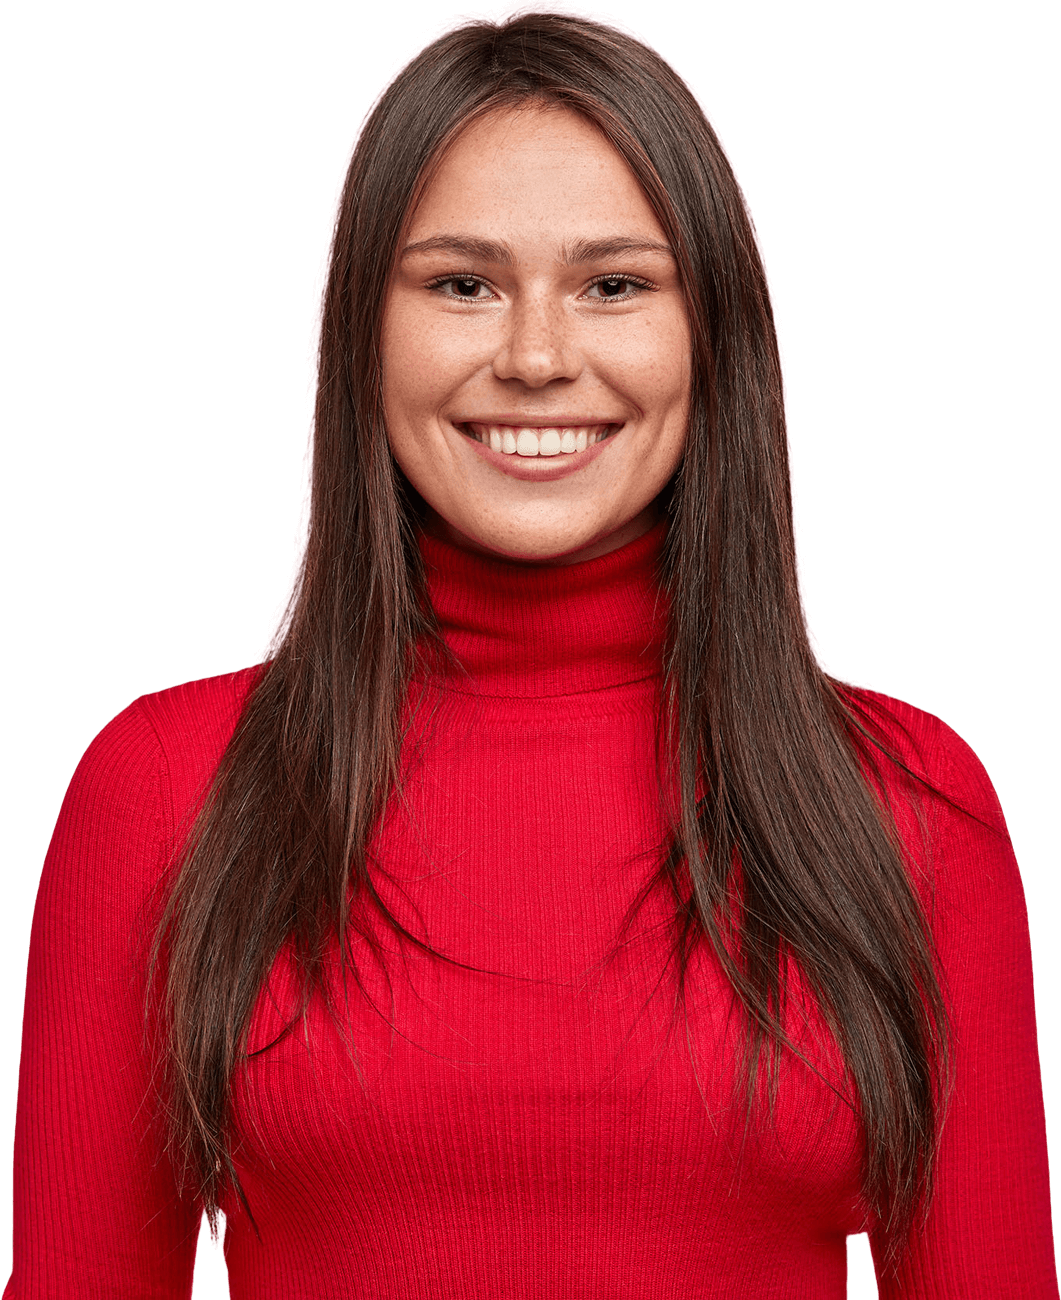 Teen driver in red sweater standing and smiling